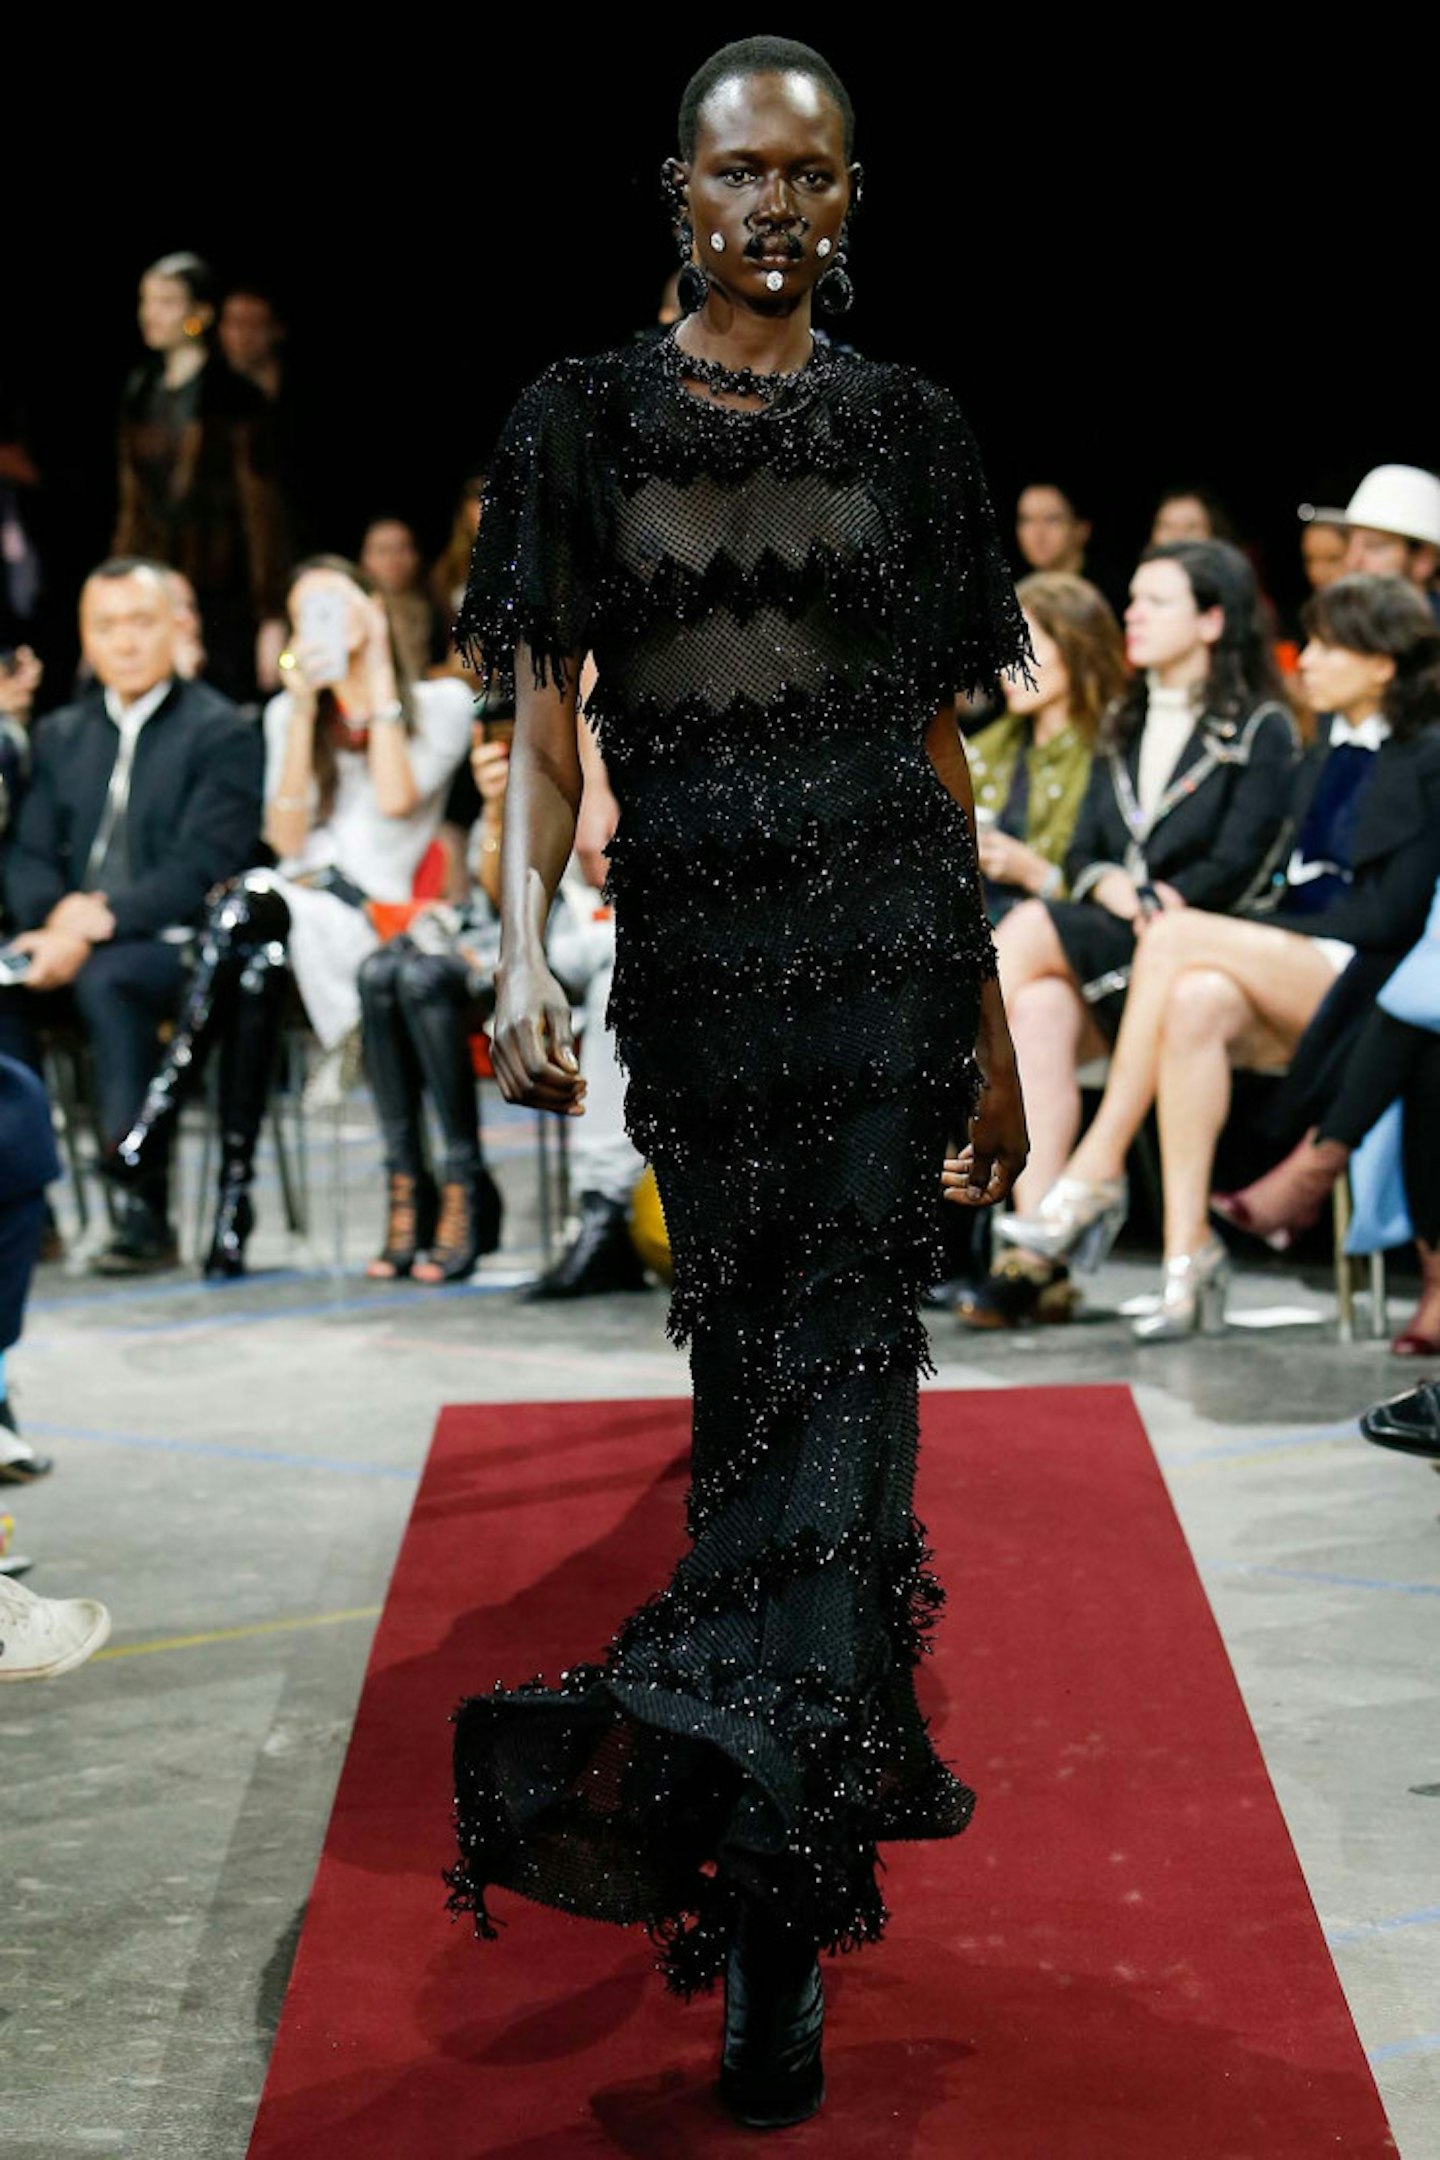 Will Sienna have a Givenchy moment? Minus the face jewels of course!